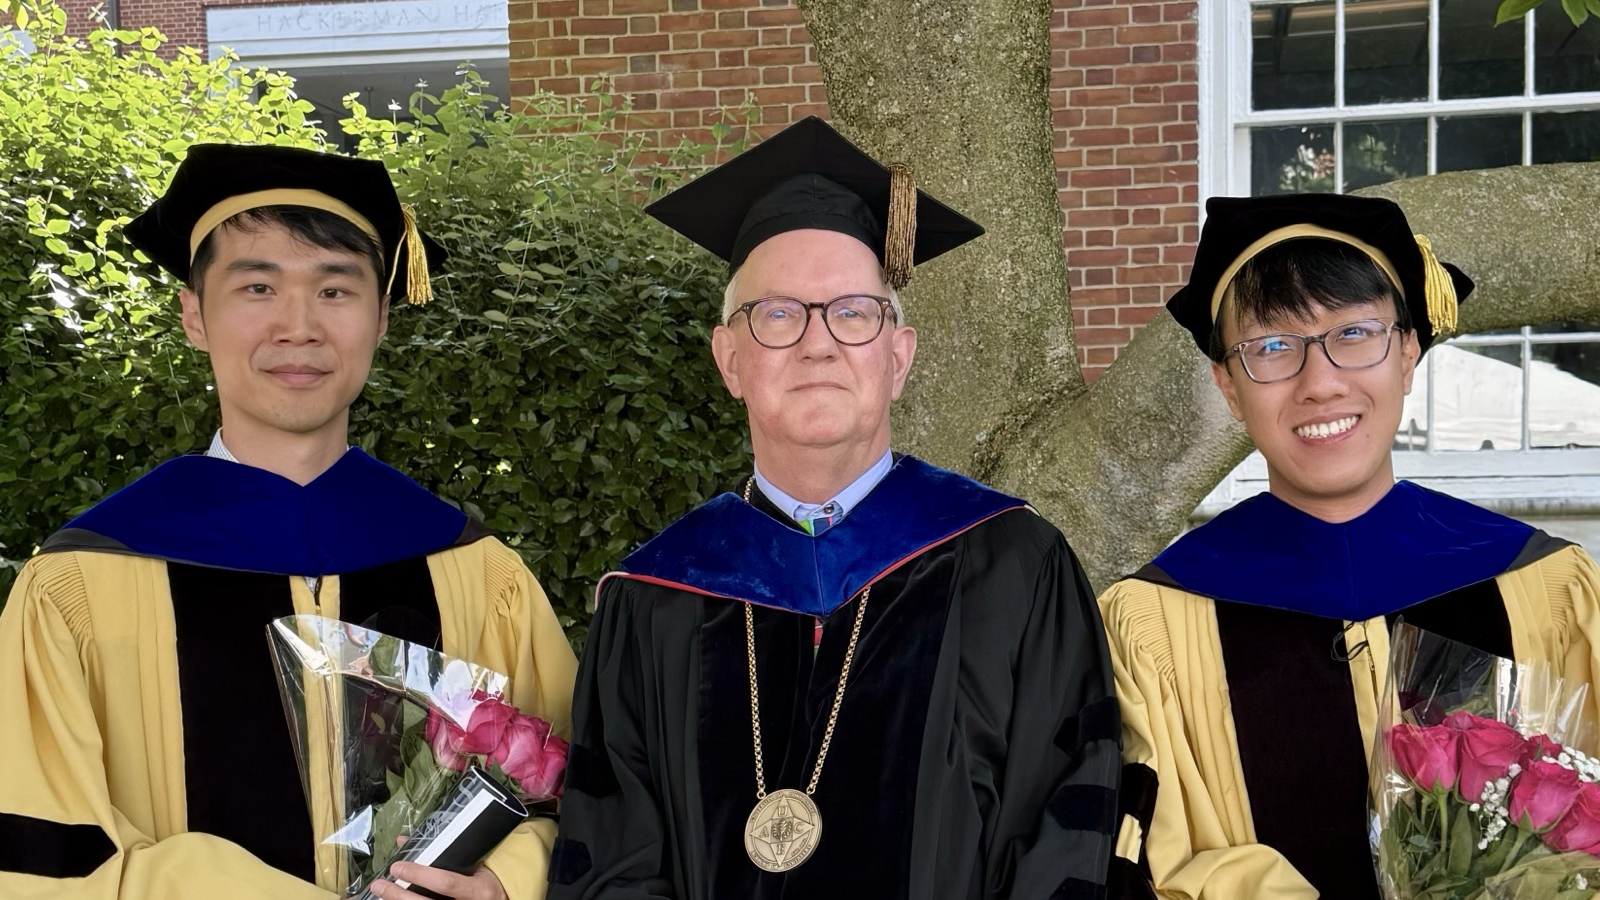 Drs. Yihao Liu and Lianrui Zuo after their hooding by Prof. J.L. Prince.